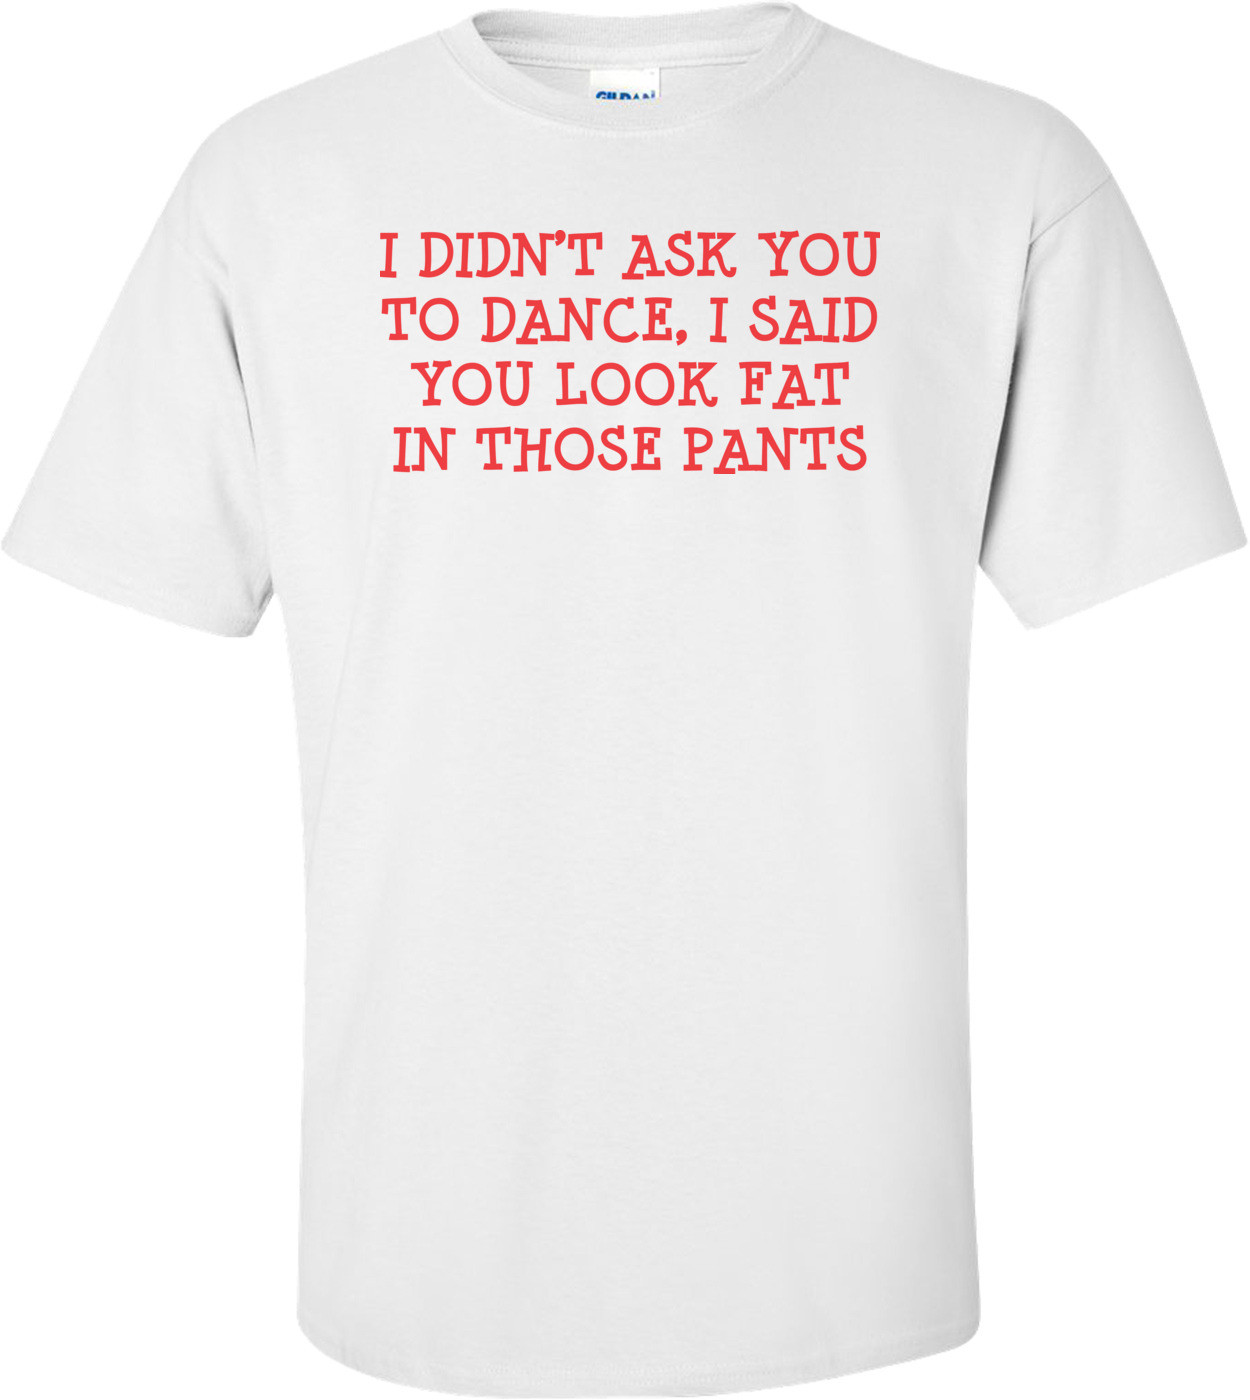 I Didn't Ask You To Dance, I Said You Look Fat In Those Pants T-shirt